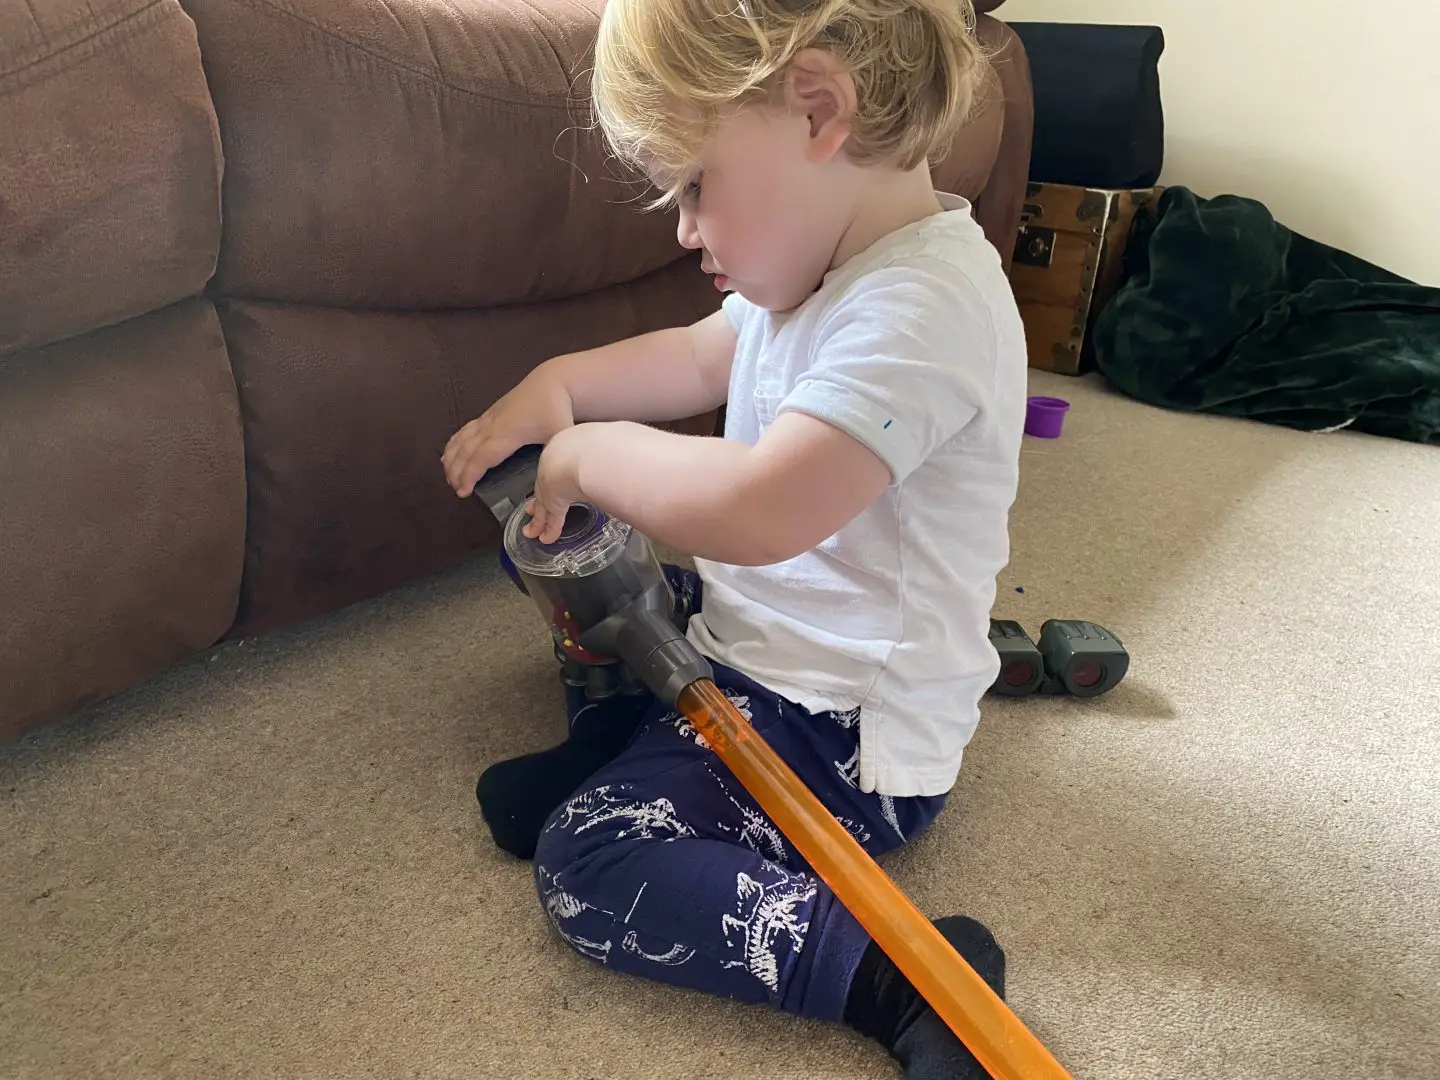 A toddler playing with a vacuum cleaner toy